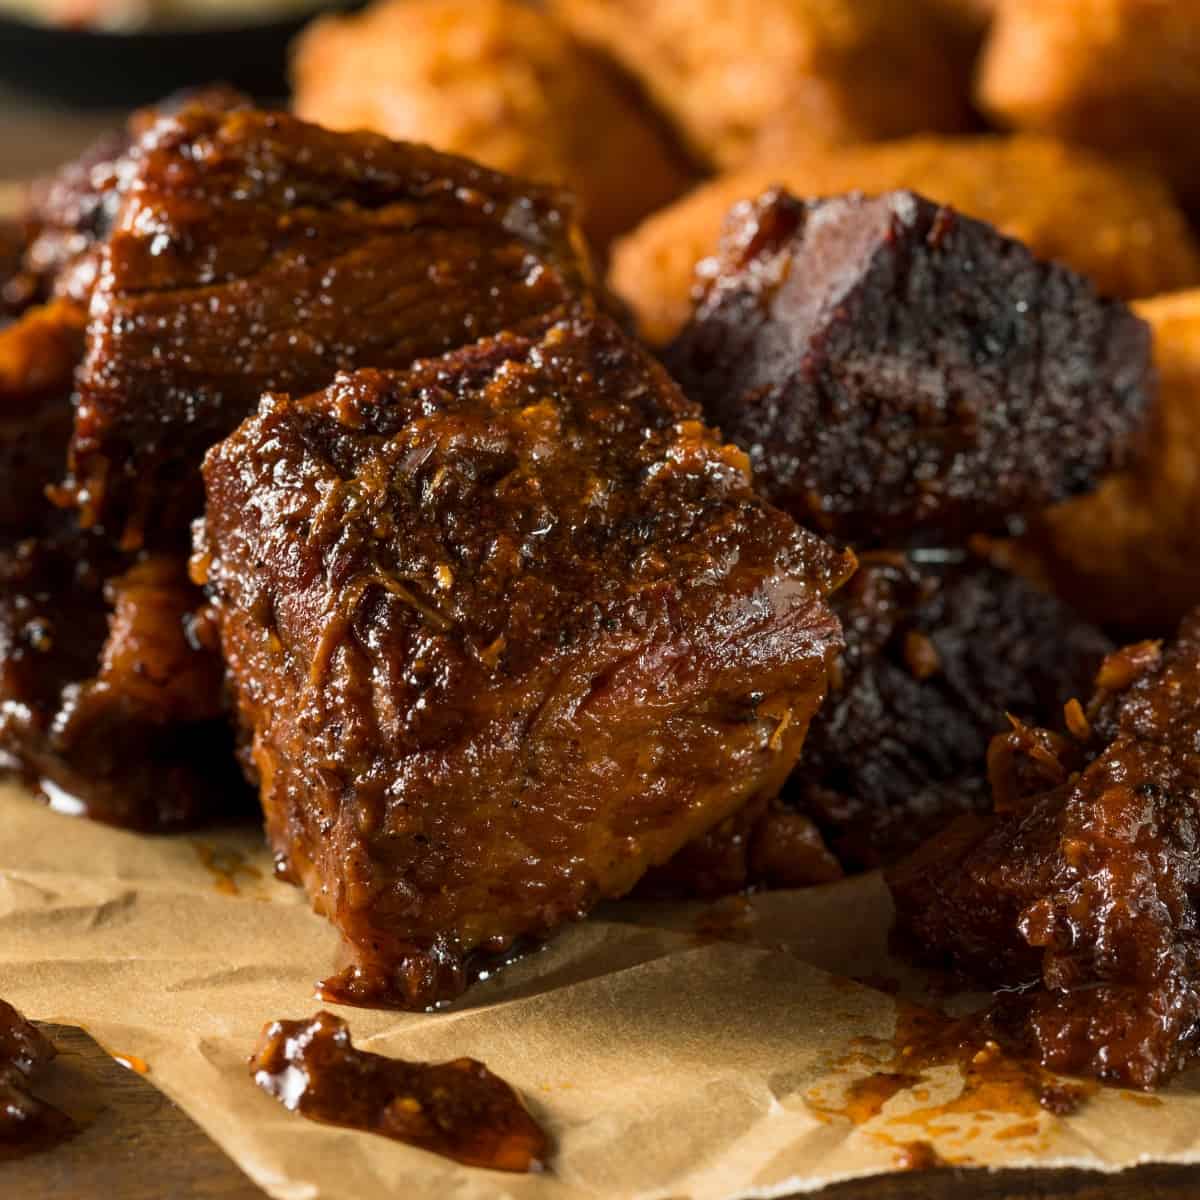 What are burnt ends